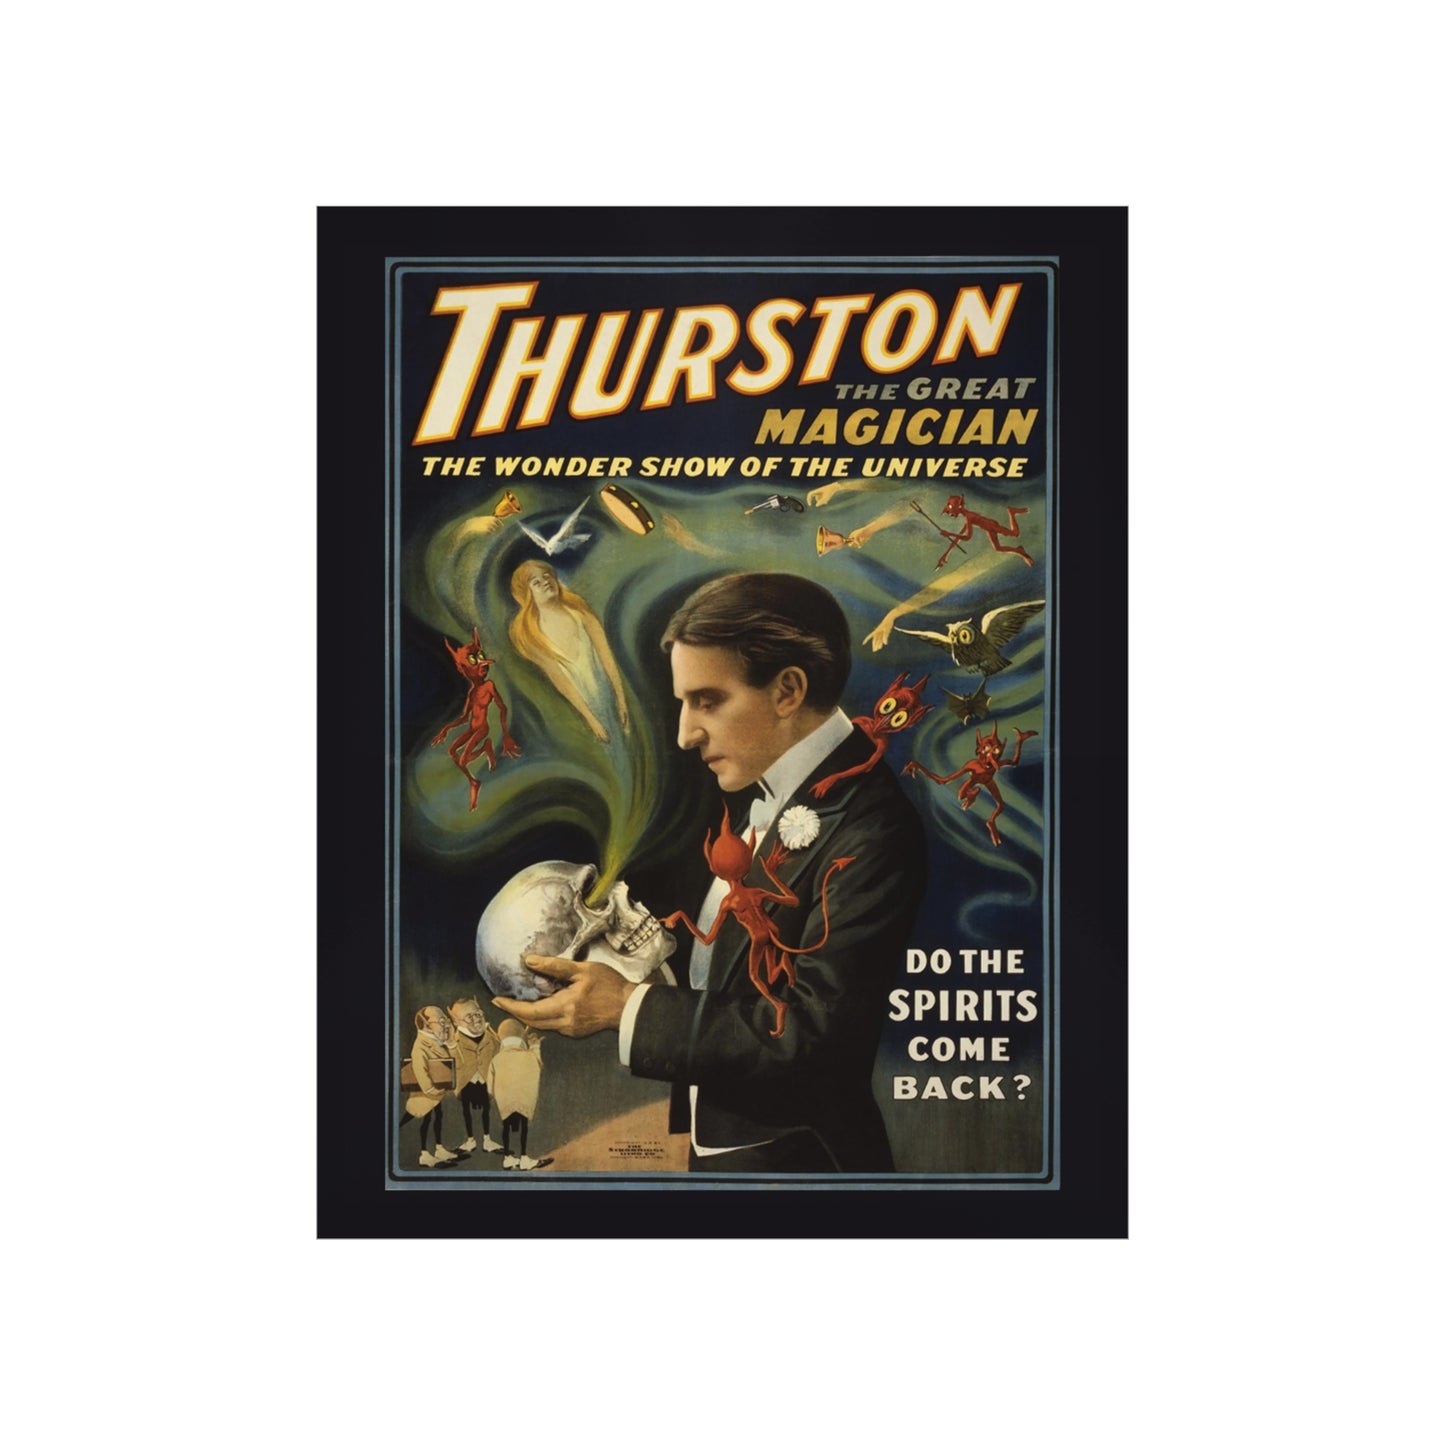 Thurston the Magician Vintage Poster